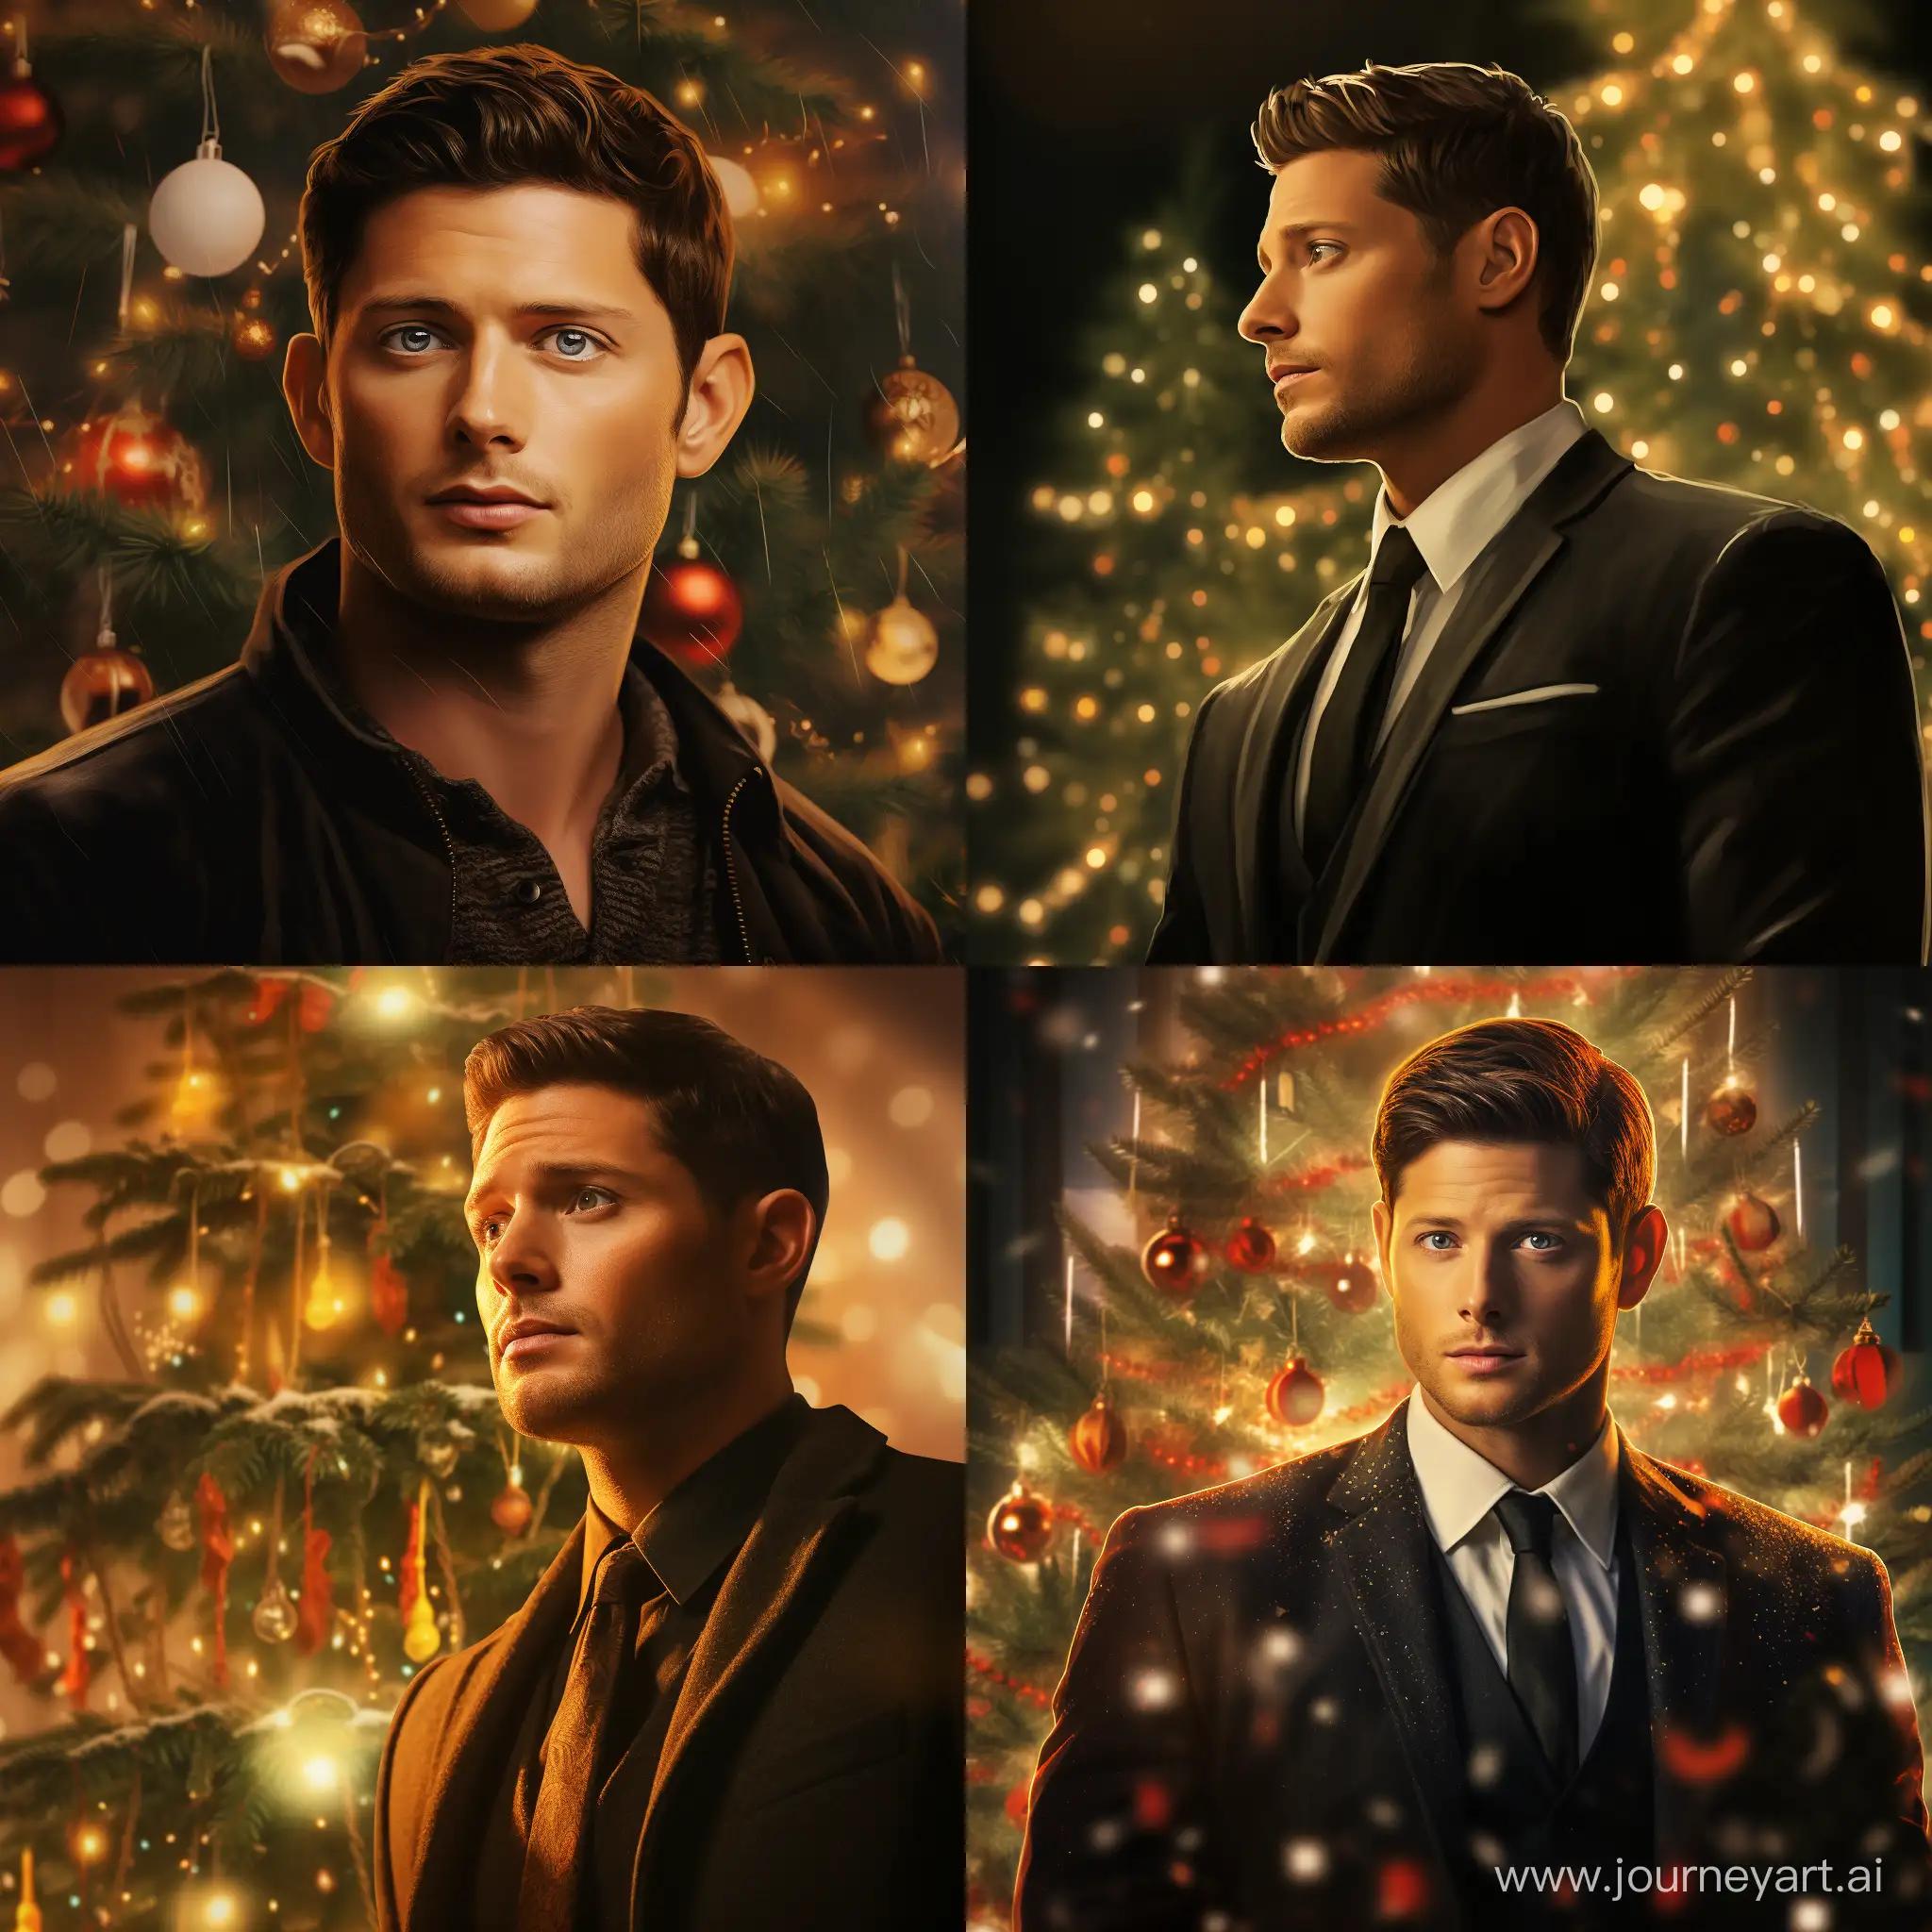 Dean-Winchester-Celebrates-New-Year-with-Jensen-Ackles-by-the-Christmas-Tree